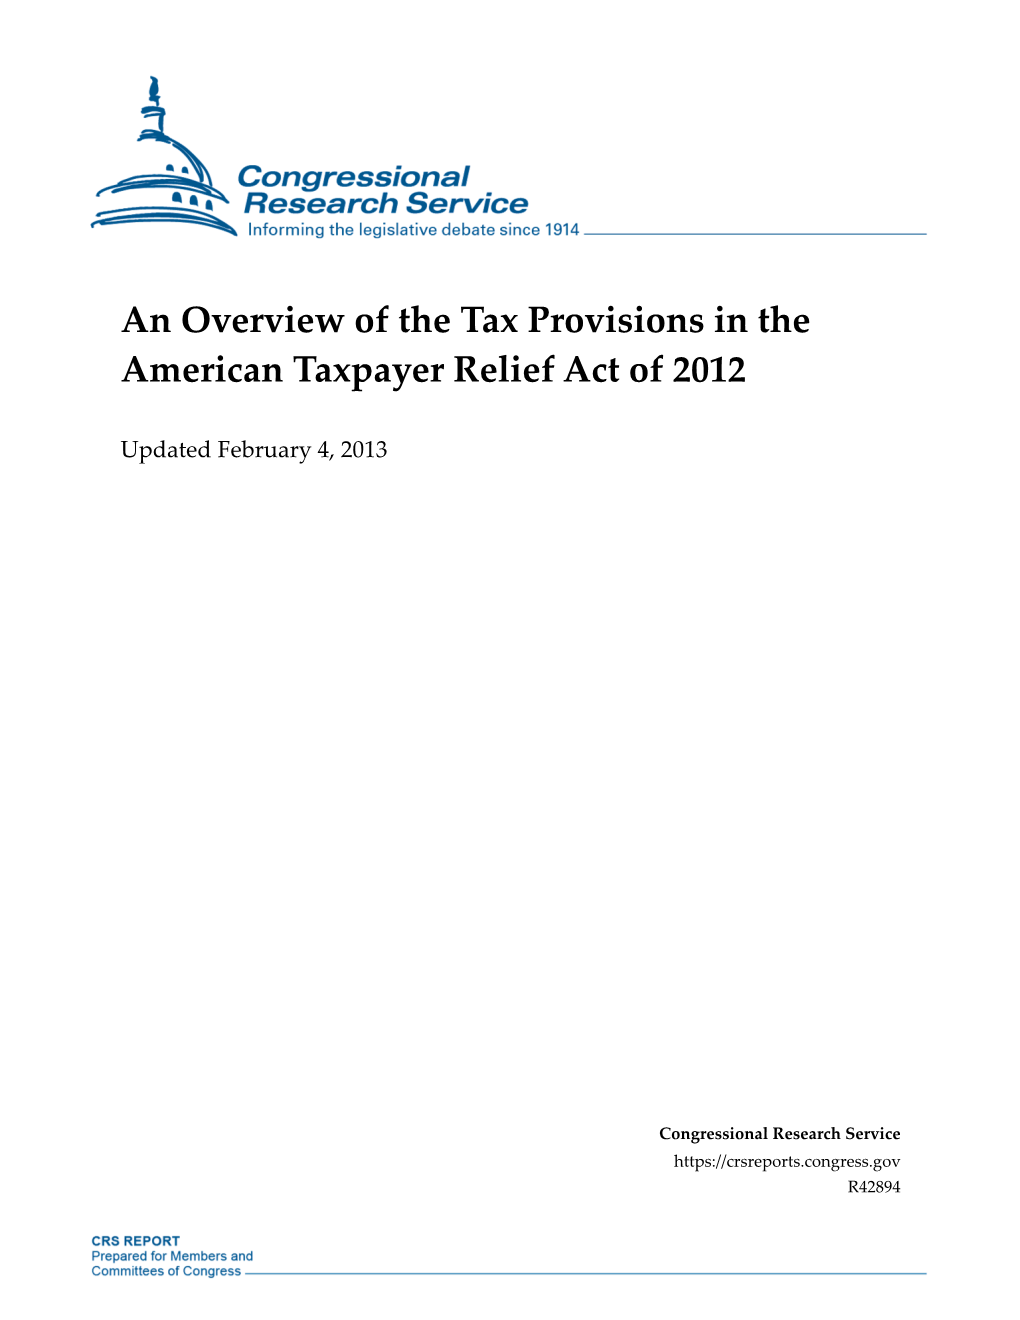 An Overview of the Tax Provisions in the American Taxpayer Relief Act of 2012